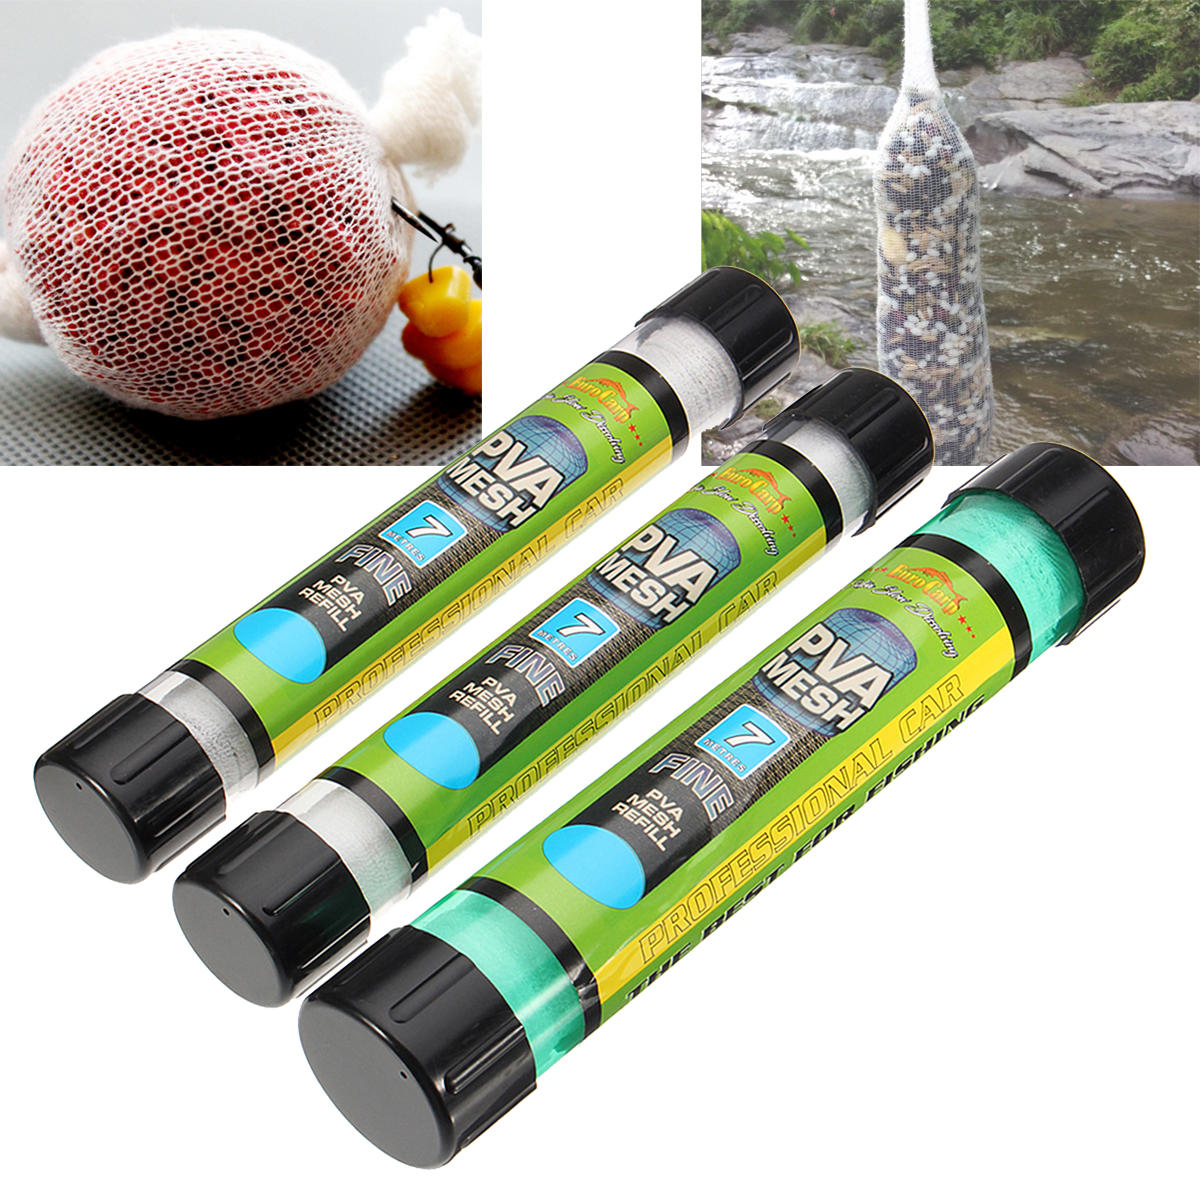 CARP FISHING BAIT TUBE PLUNGER TWO SIZE ENDS FOR FILLING PVA BAGS